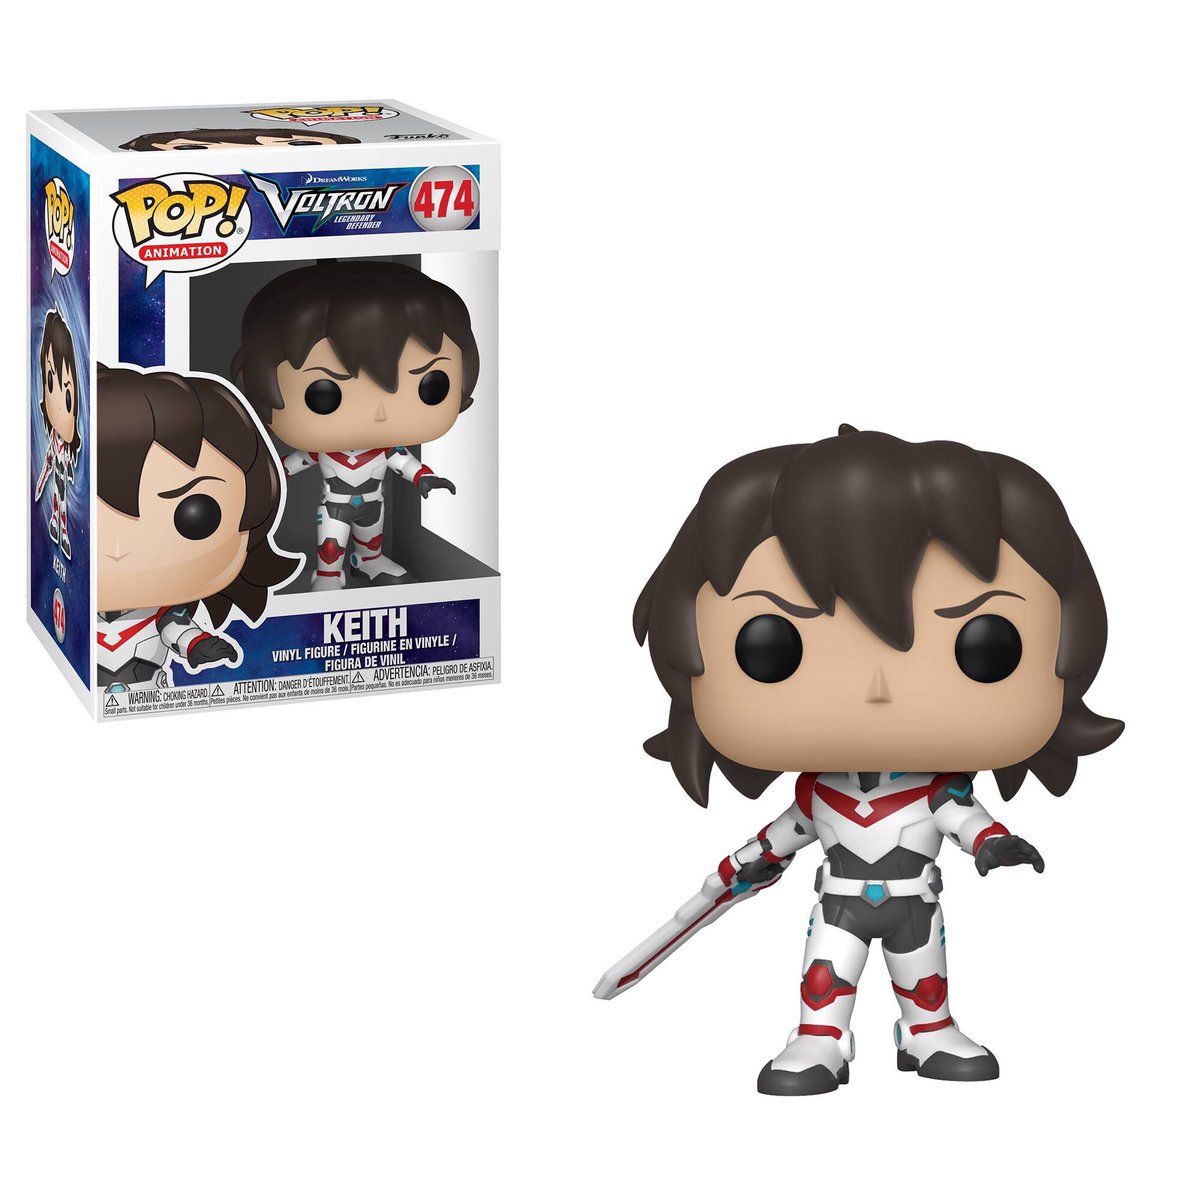 I'm back! All vinyls now ready to ship! #thevoltronstore #keith #voltron #limitedquantities